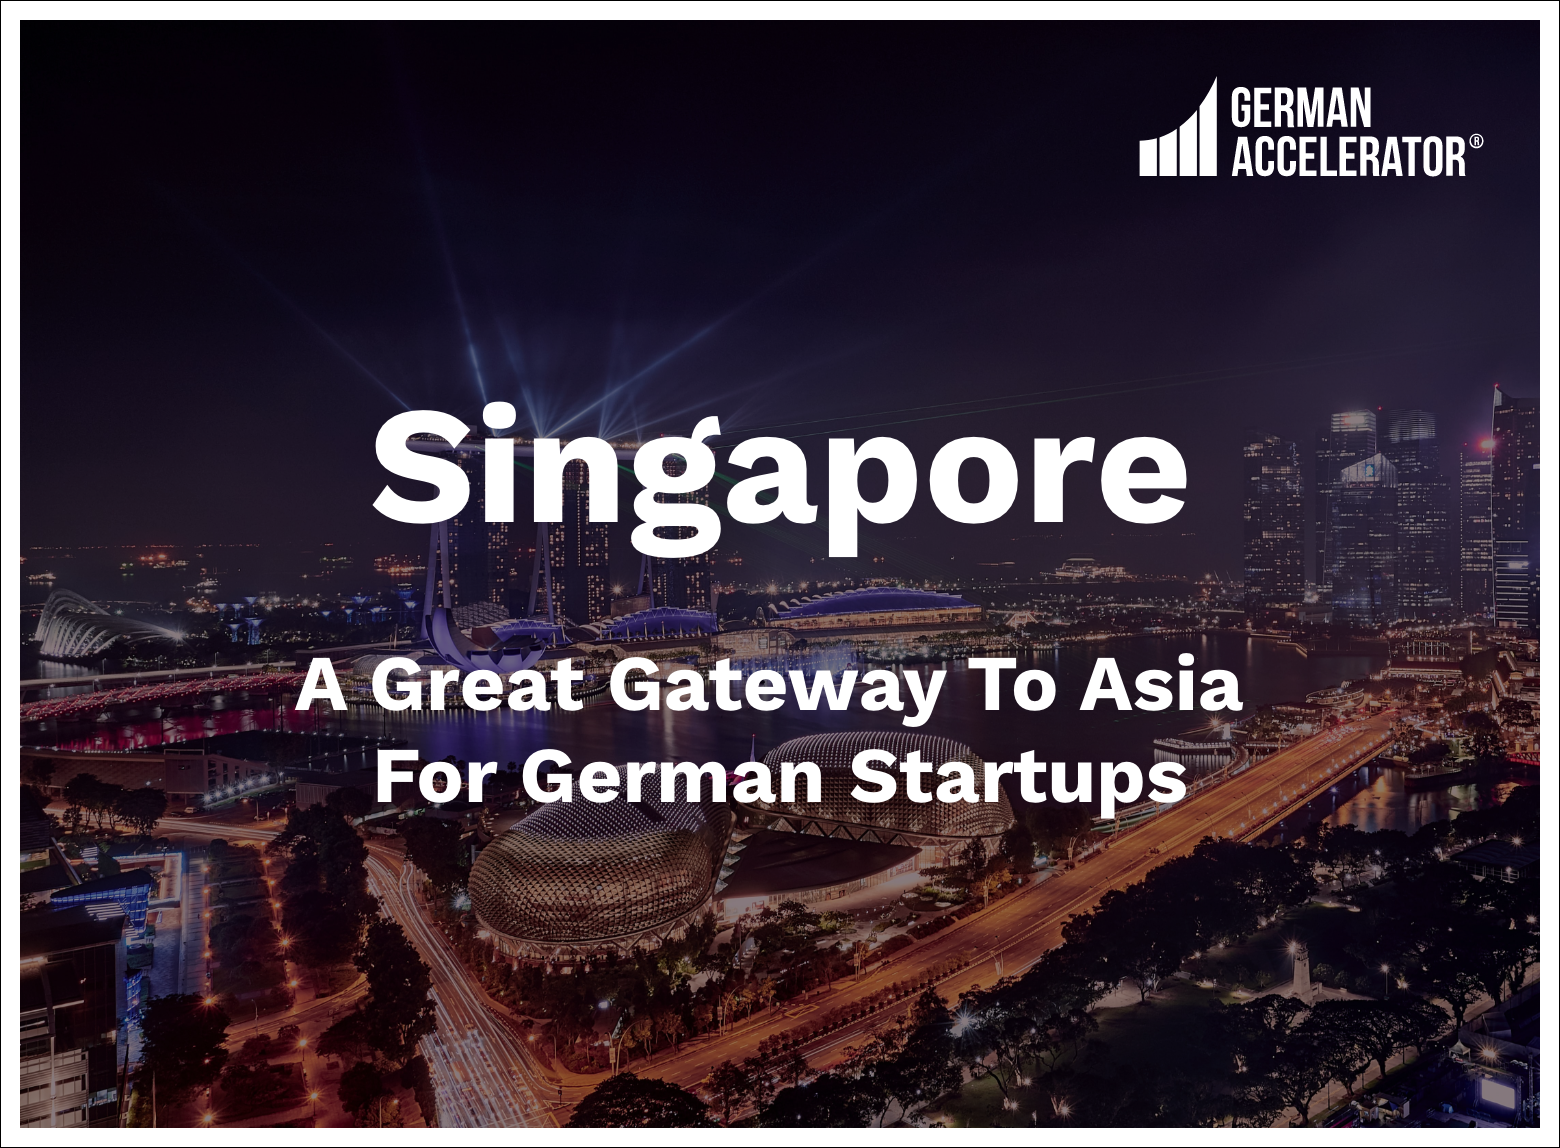 Singapore, A Great Gateway To Asia For German Startups